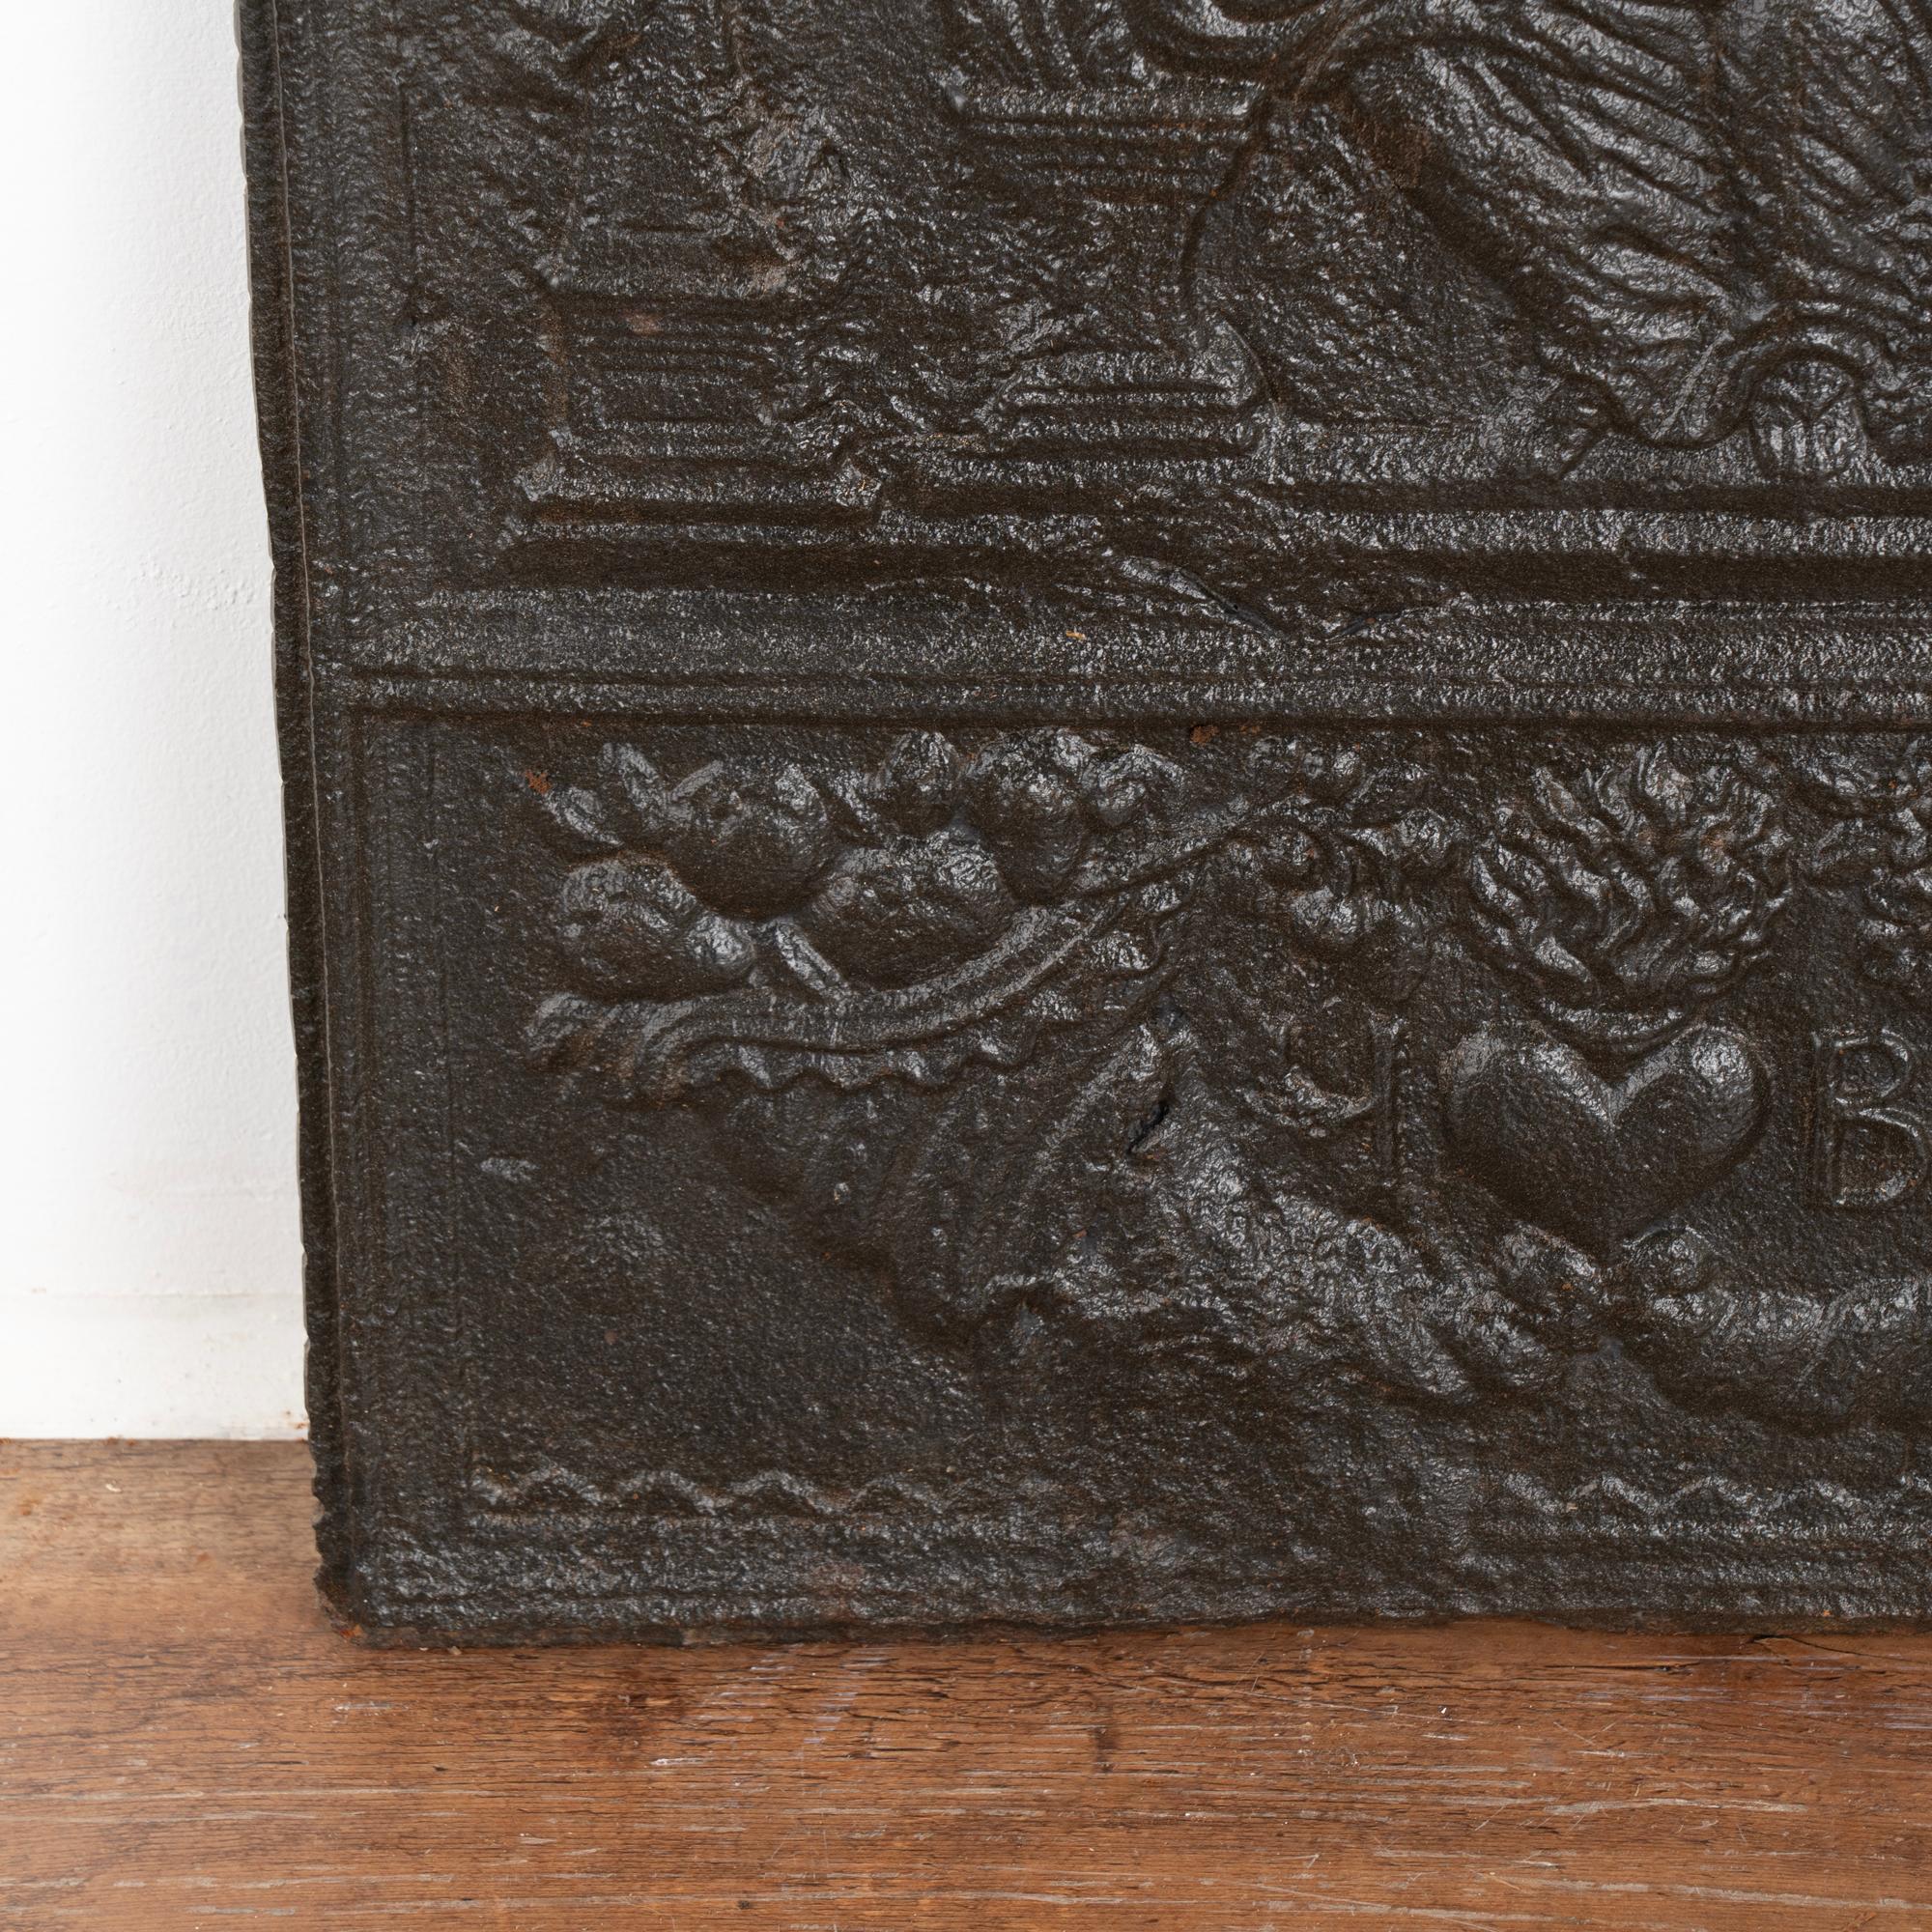 Decorative Cast Iron Fire Back With Queen, Sweden circa 1760-80 For Sale 2